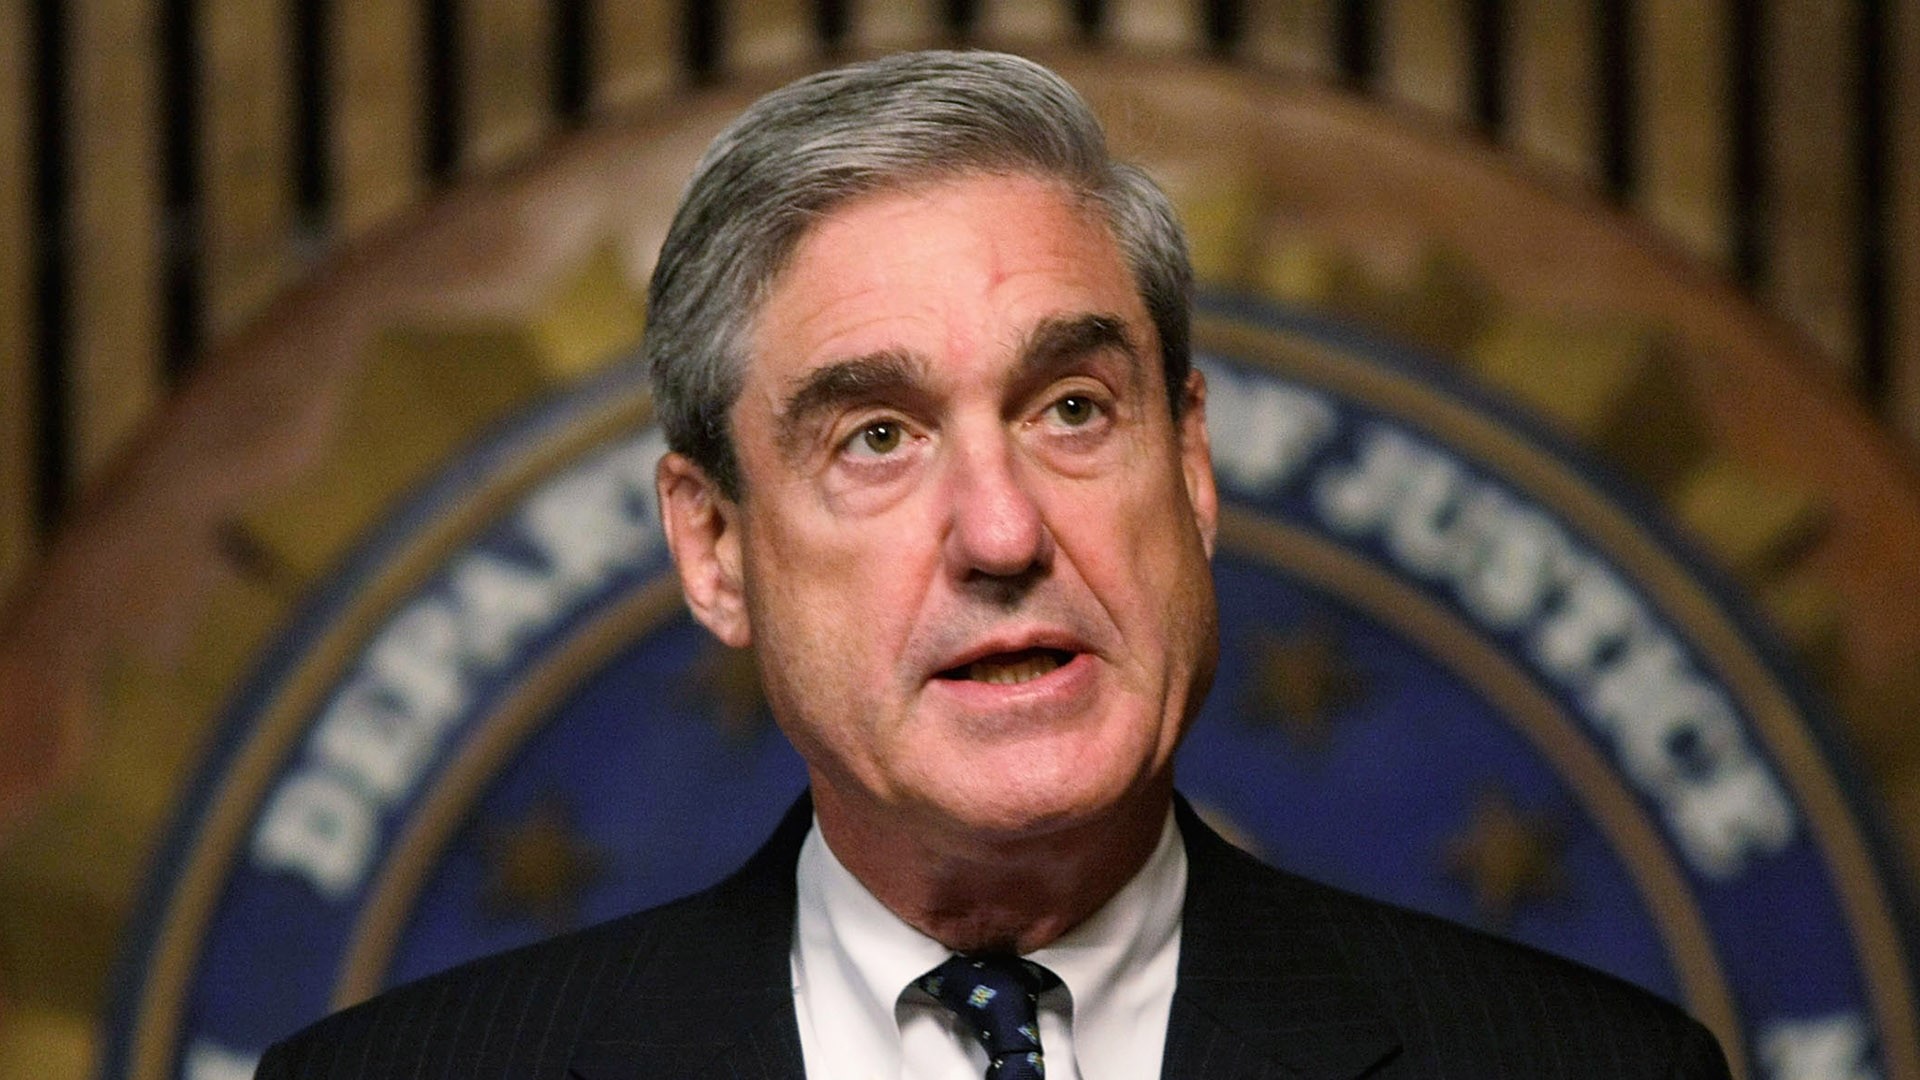 "The Mueller Investigation". "The Probe."
Reports say it'll be released shortly. We've heard that before. Regardless of the outcome, your thoughts about President Trump won't change.